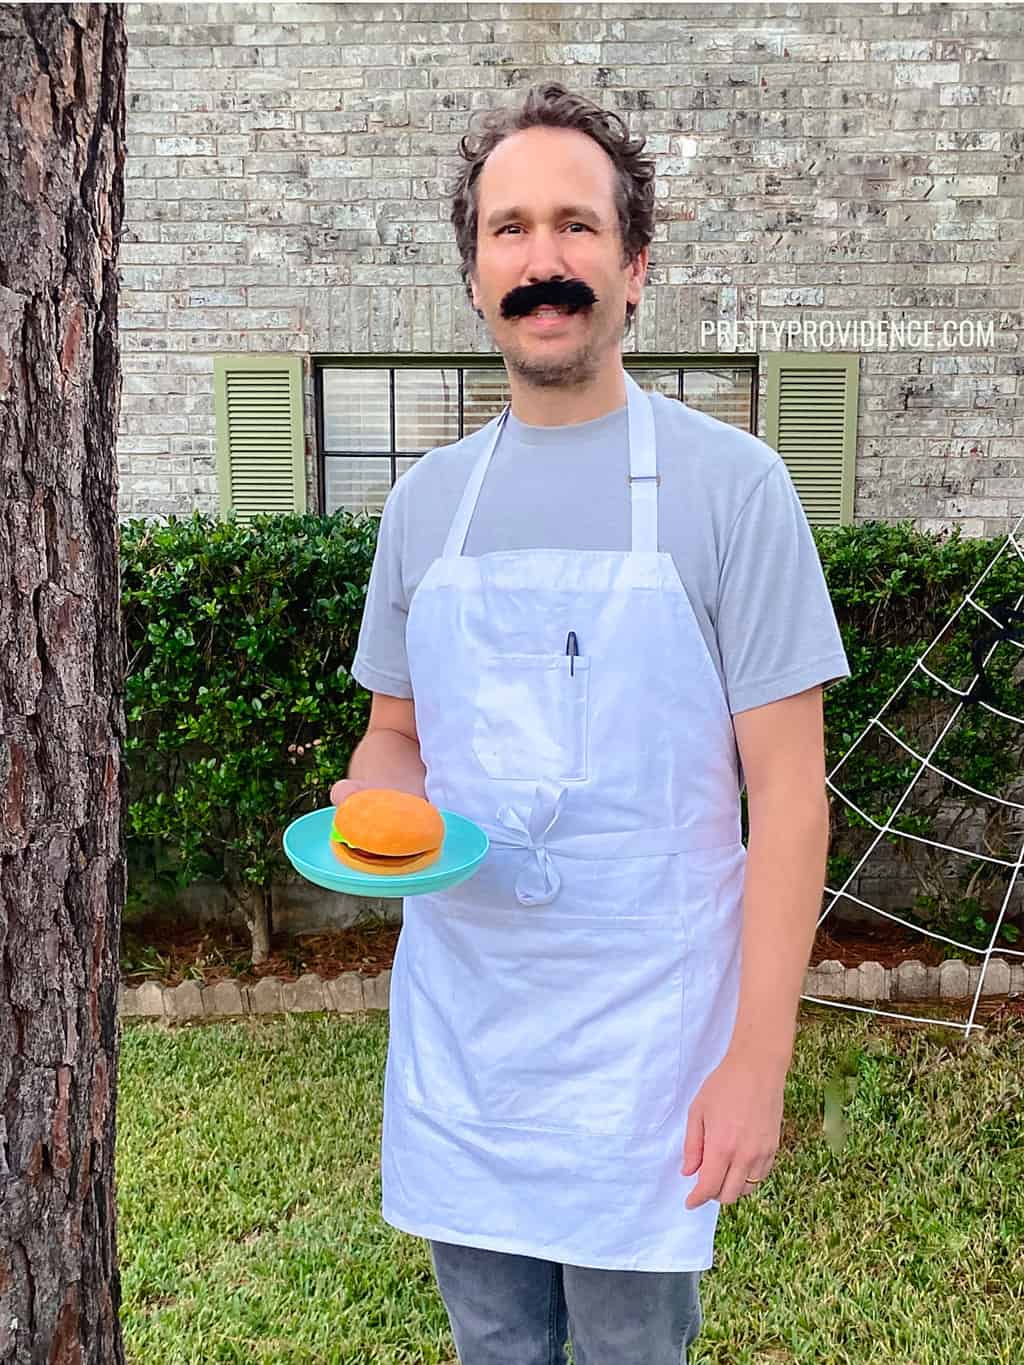 Man dressed as Bob Belcher from Bob's Burgers Costume wearing a gray t-shirt, white apron, bushy black mustache and holding a toy hamburger on a plate. 